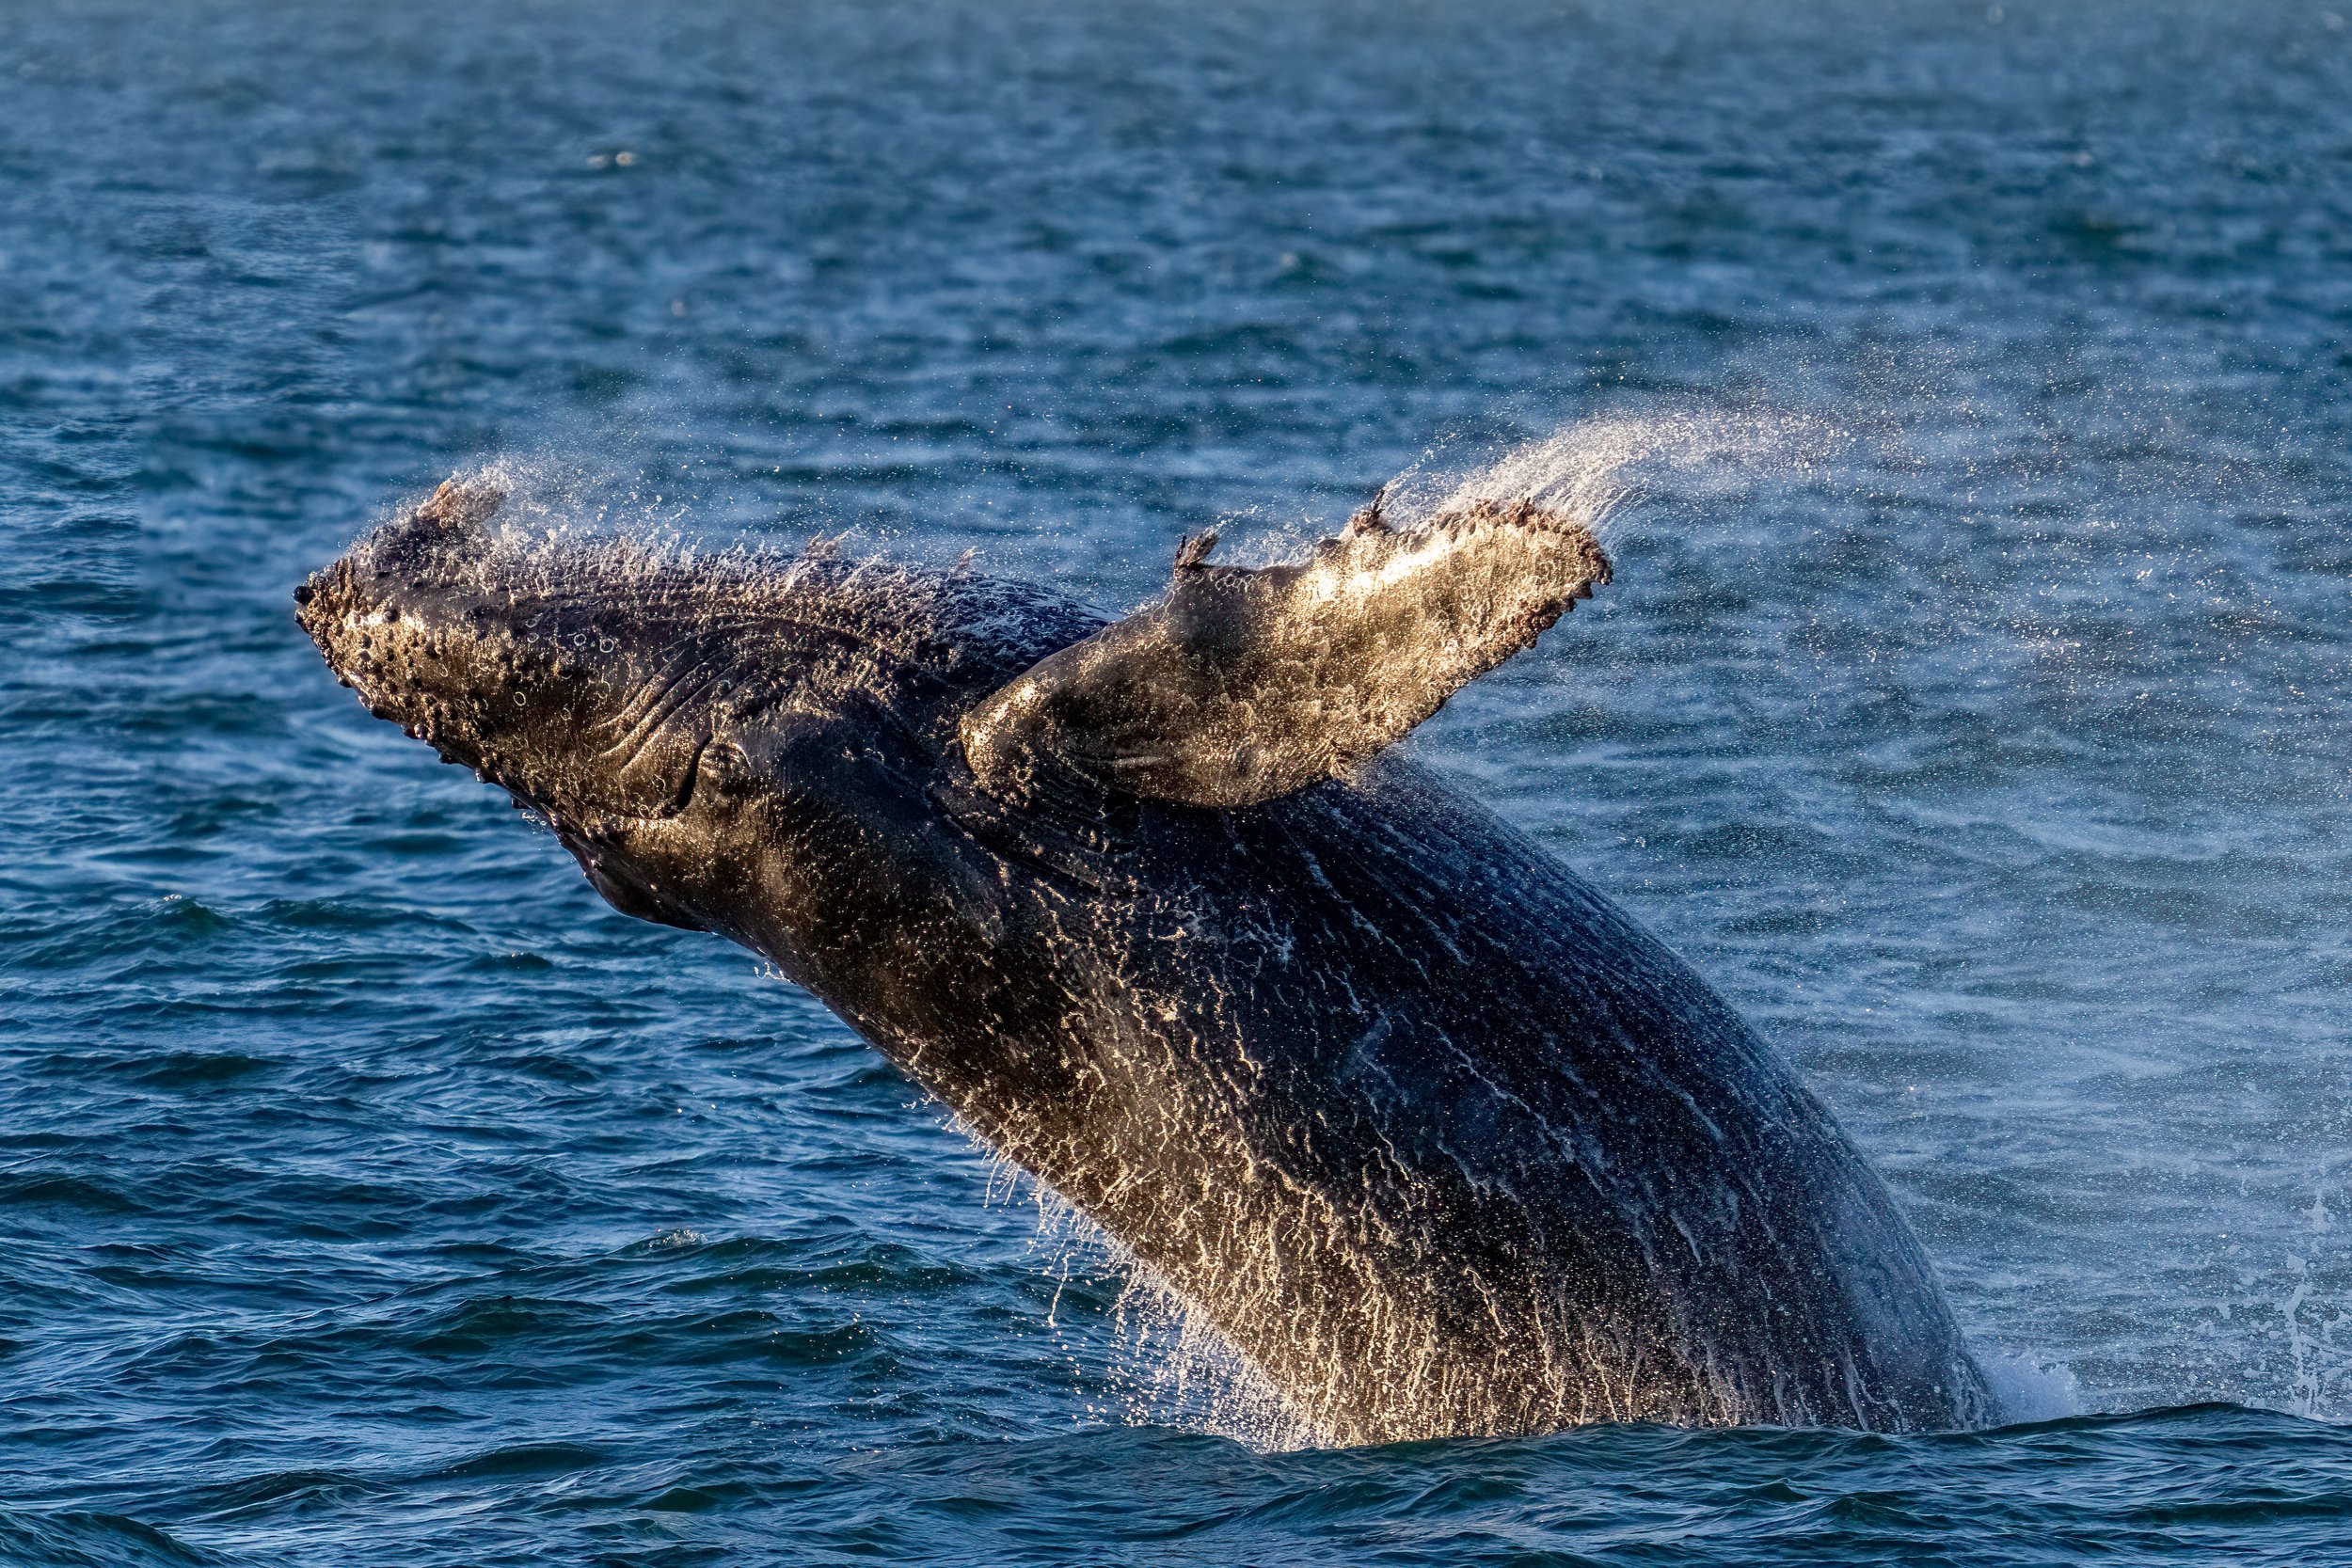 Whale in Monterey Bay